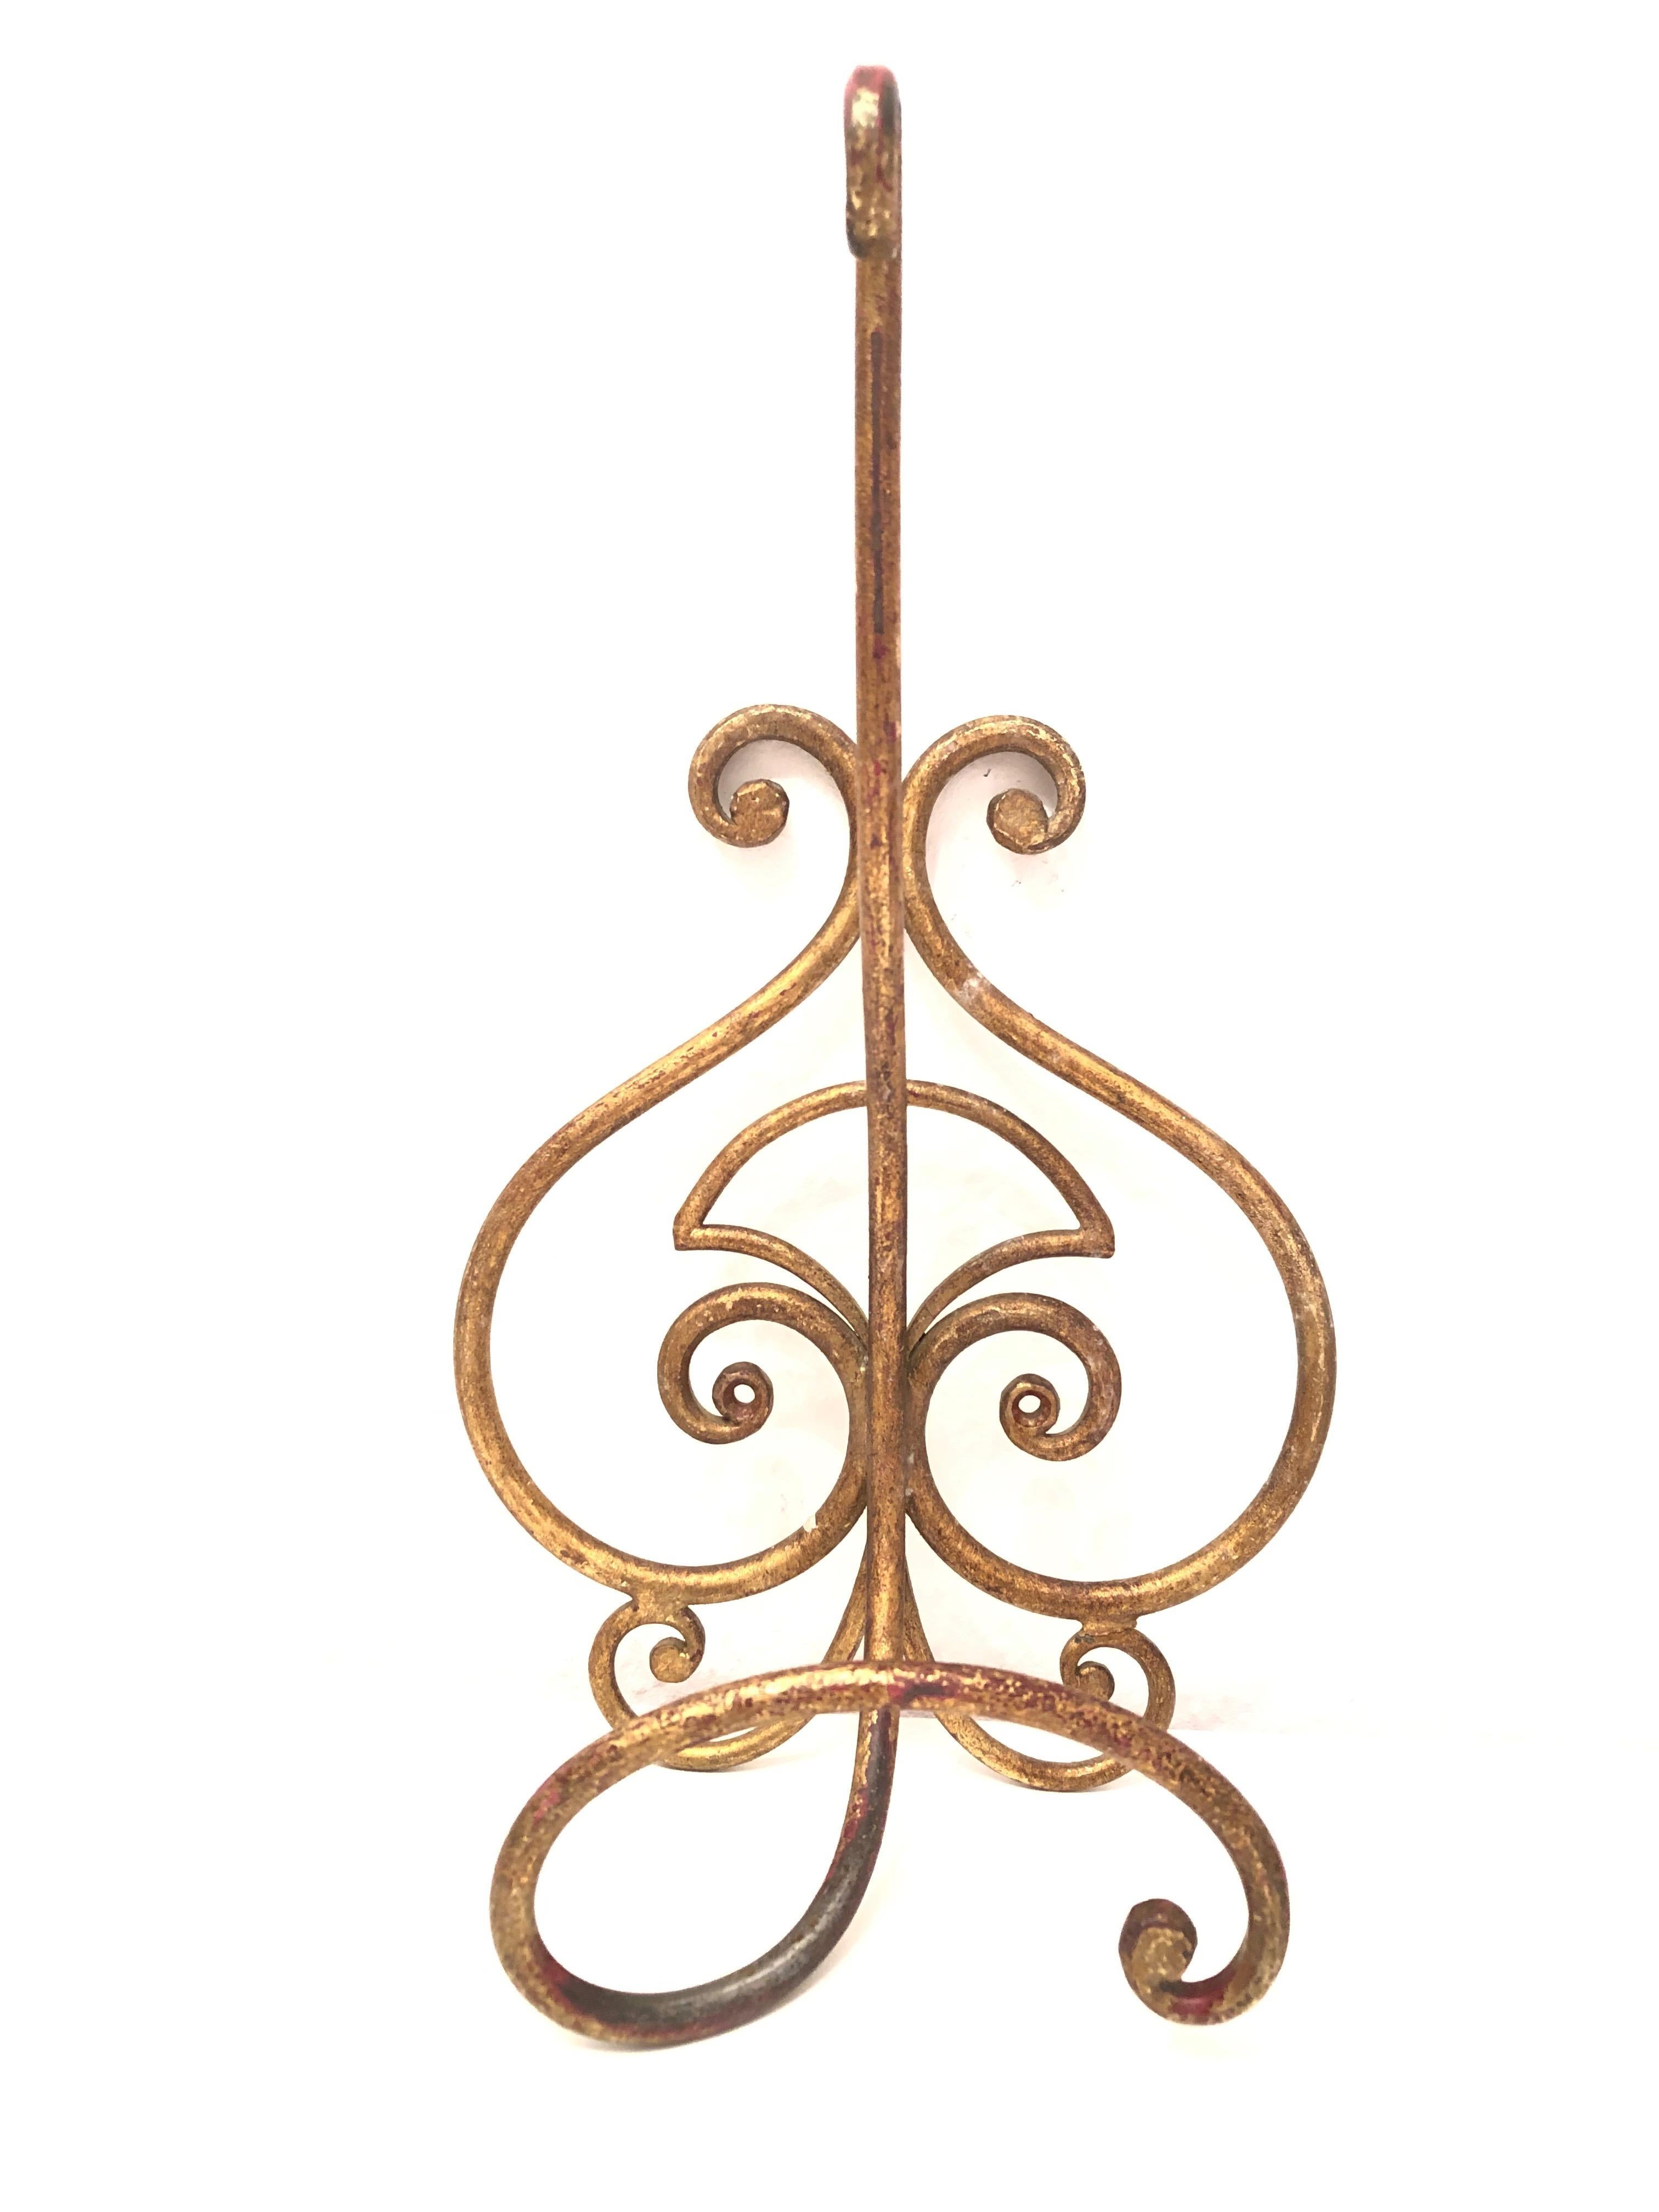 Offered is an absolutely stunning, 1950s Italian gilt metal coat hook set for your hall entry. Minor patina and paint lost gives these pieces a classy statement.